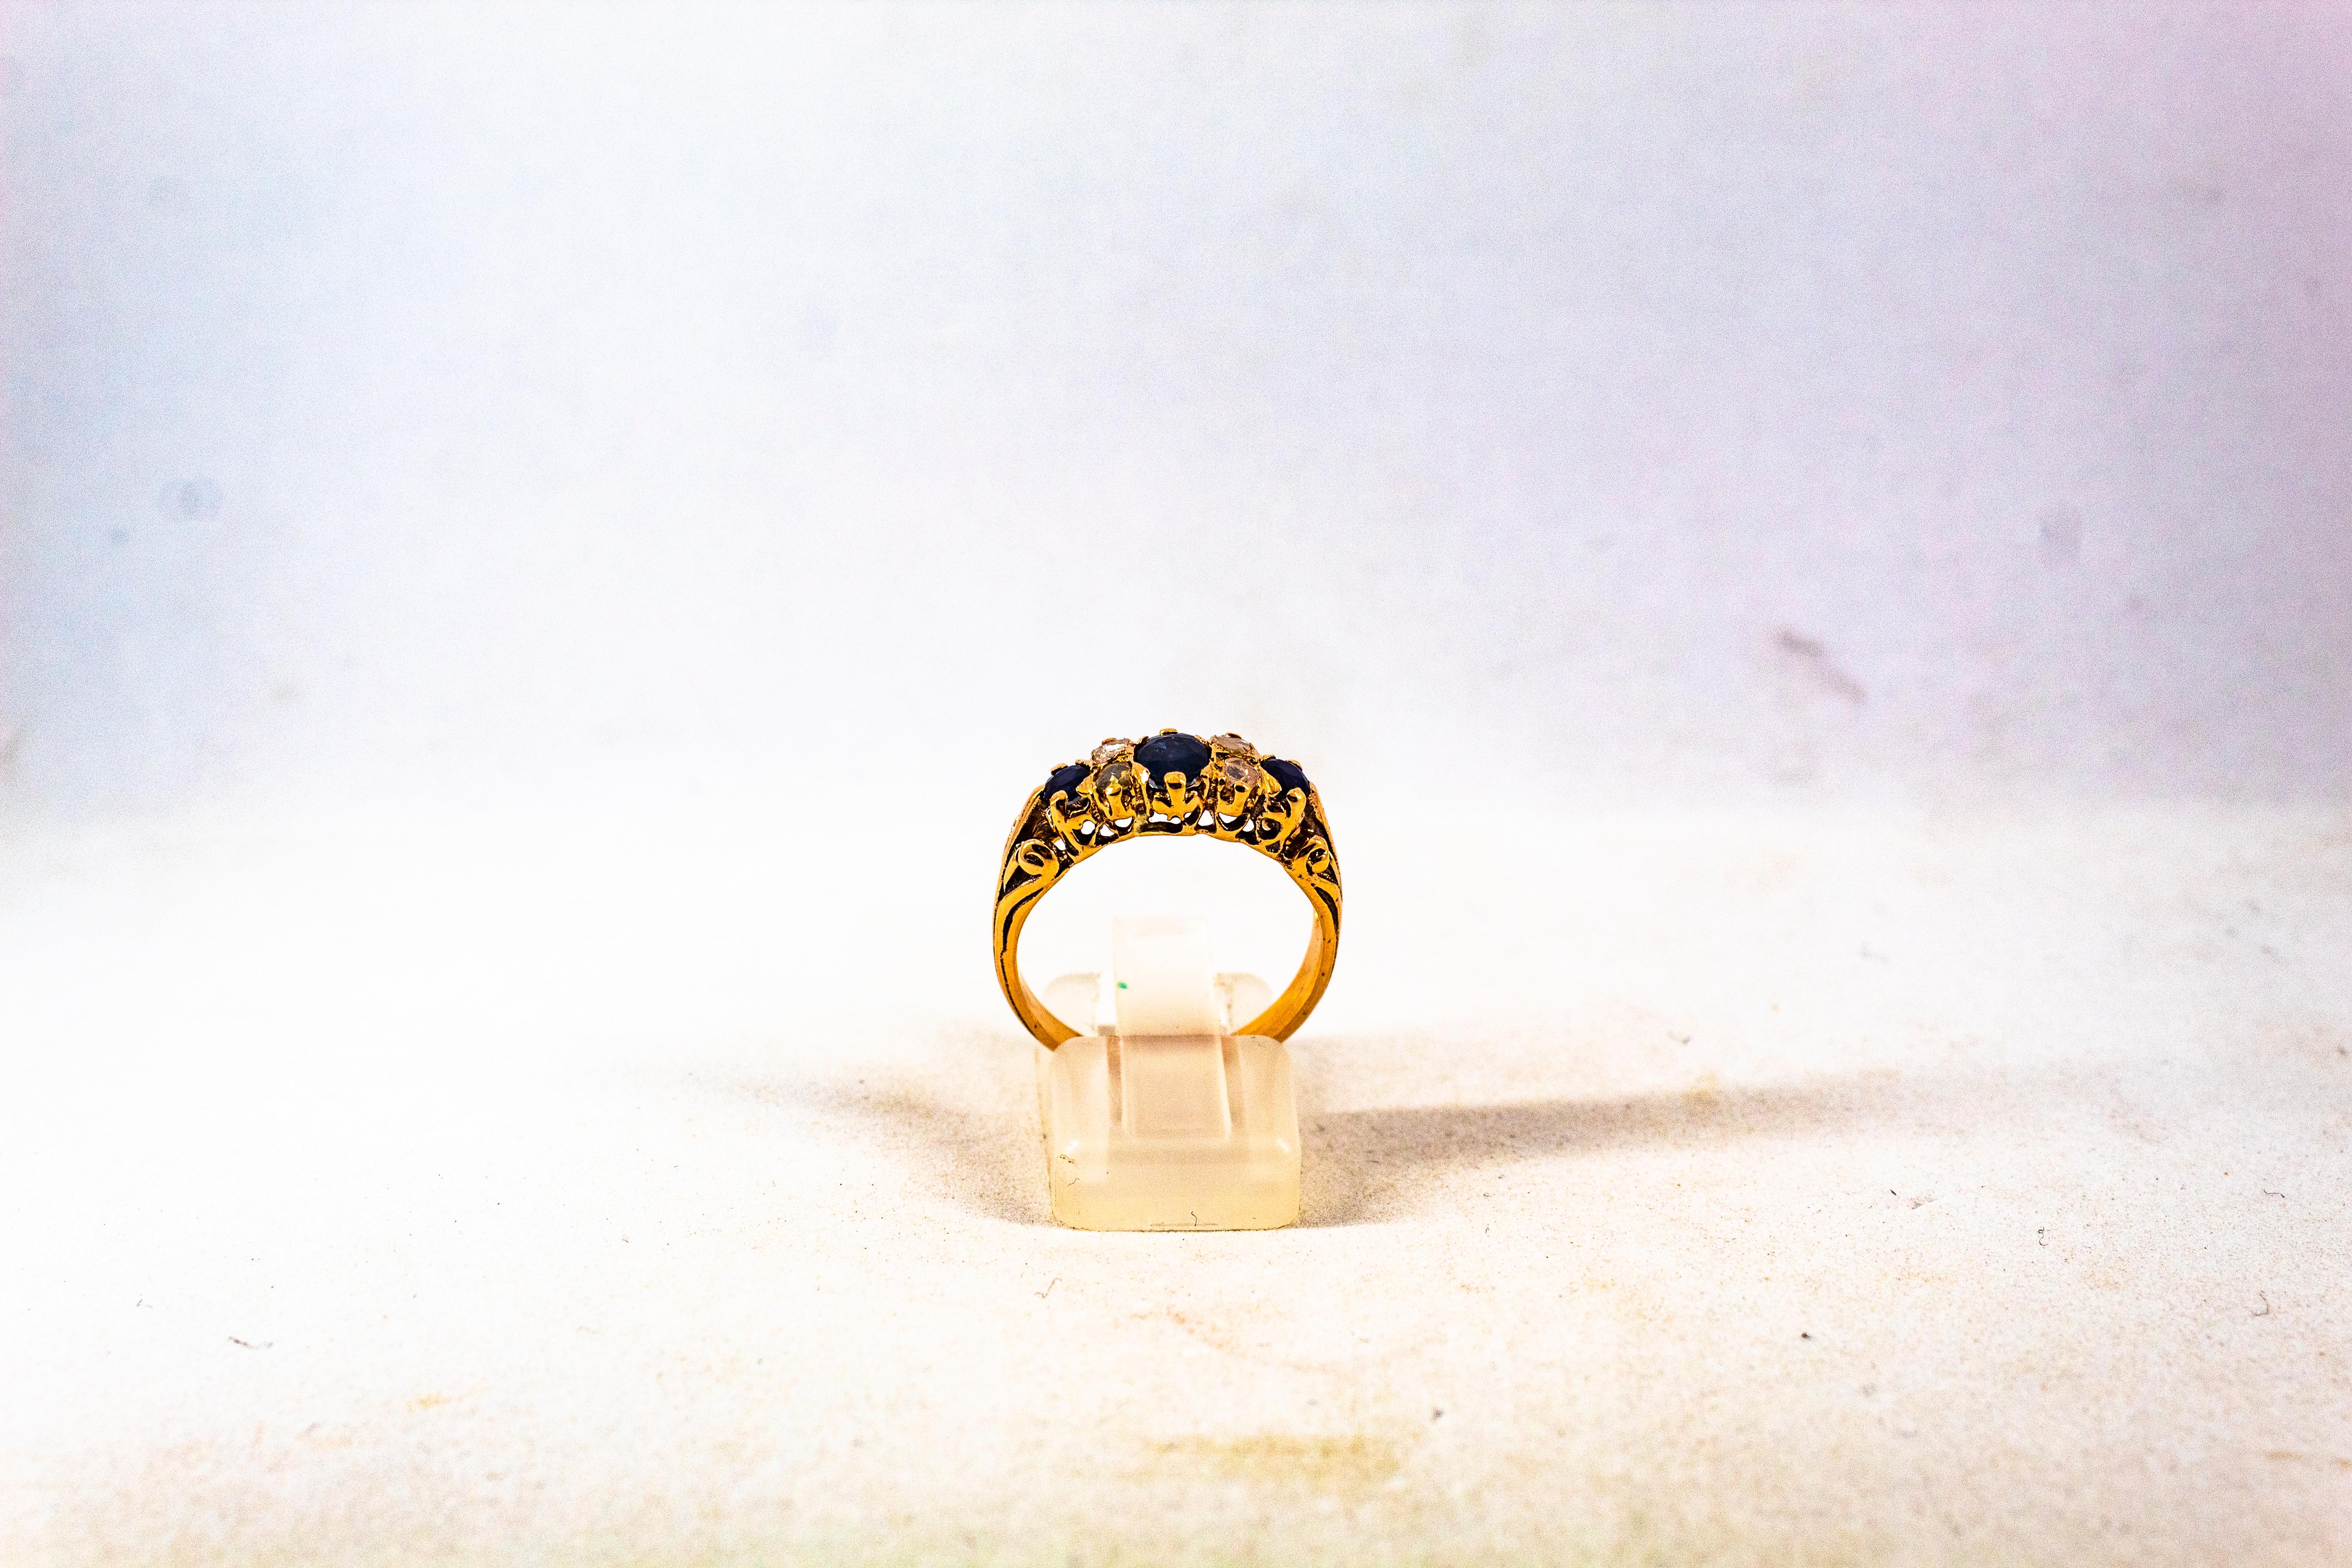 This Ring is made of 9K Yellow Gold.
This Ring has 0.15 Carats of White Rose Cut Diamonds.
This Ring has 0.60 Carats of Oval Cut Blue Sapphires.

This Ring is available also in 14 or 18K Yellow or White Gold.
This Ring is available also with Rubies